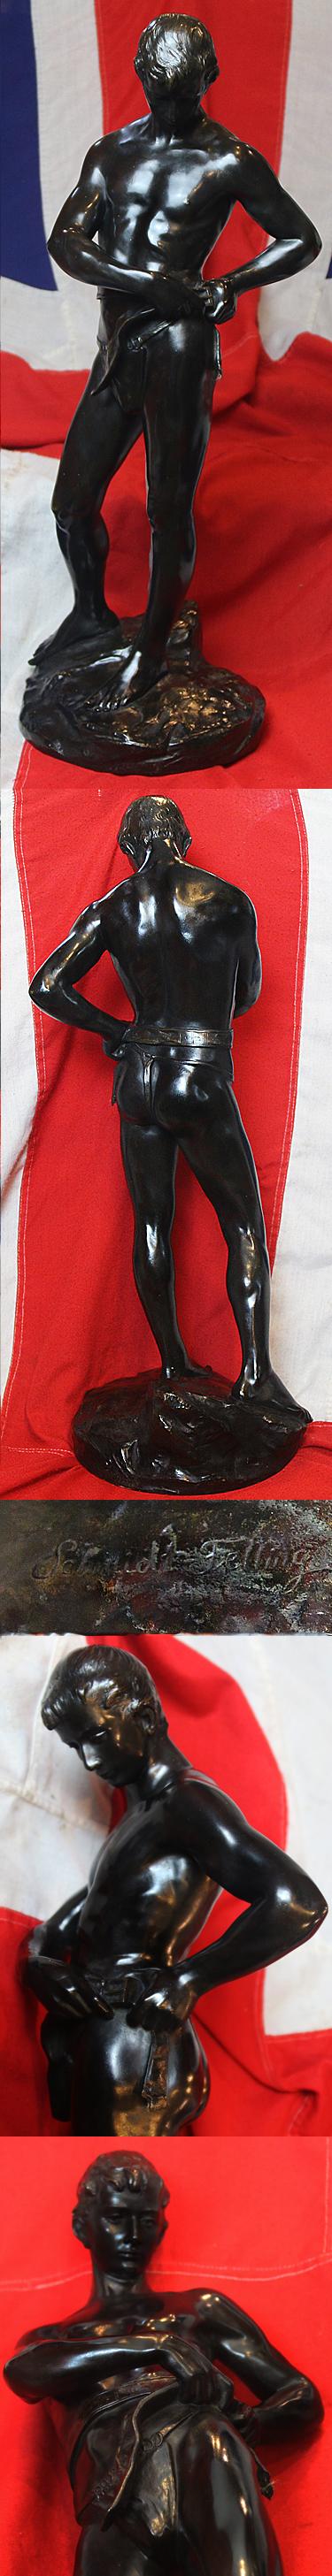 Superb Large Signed Bronze Sculpture by Julius Schmidt Felling Circa 1900's of a Standing Youth